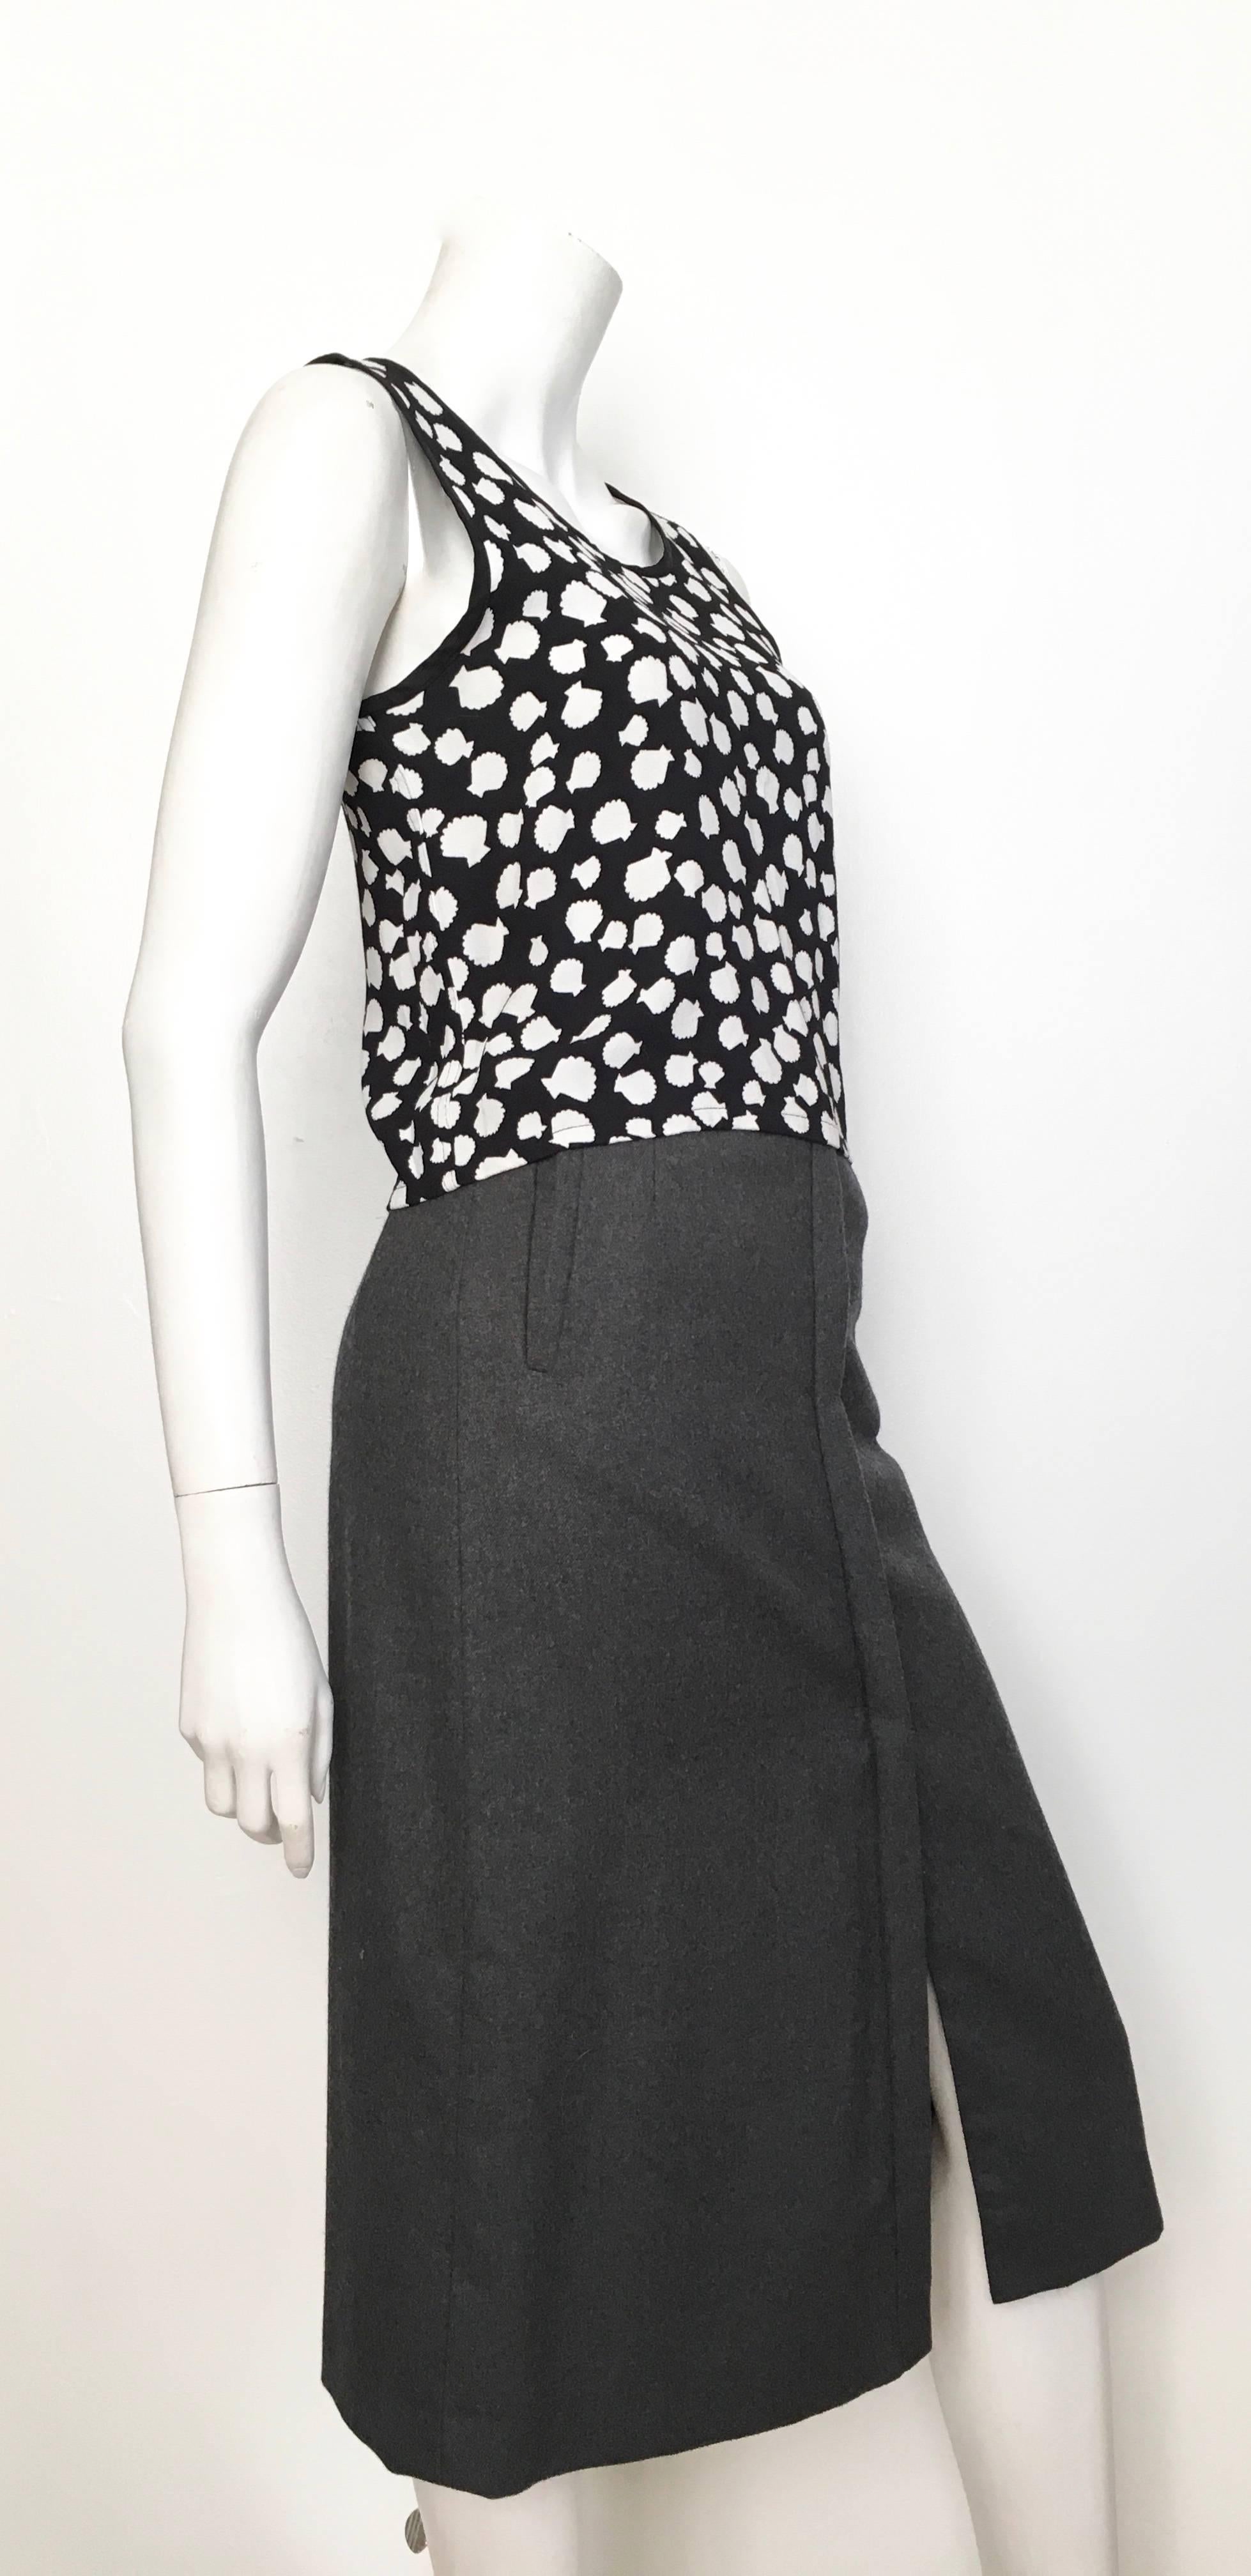 Giorgio Saint' Angelo 1980s grey wool straight skirt is labeled a size 6 but fits like a modern size 4.  Ladies please grab your tape measure and measure your waist & hips to make certain this timeless skirt will fit your lovely body.  Skirt is